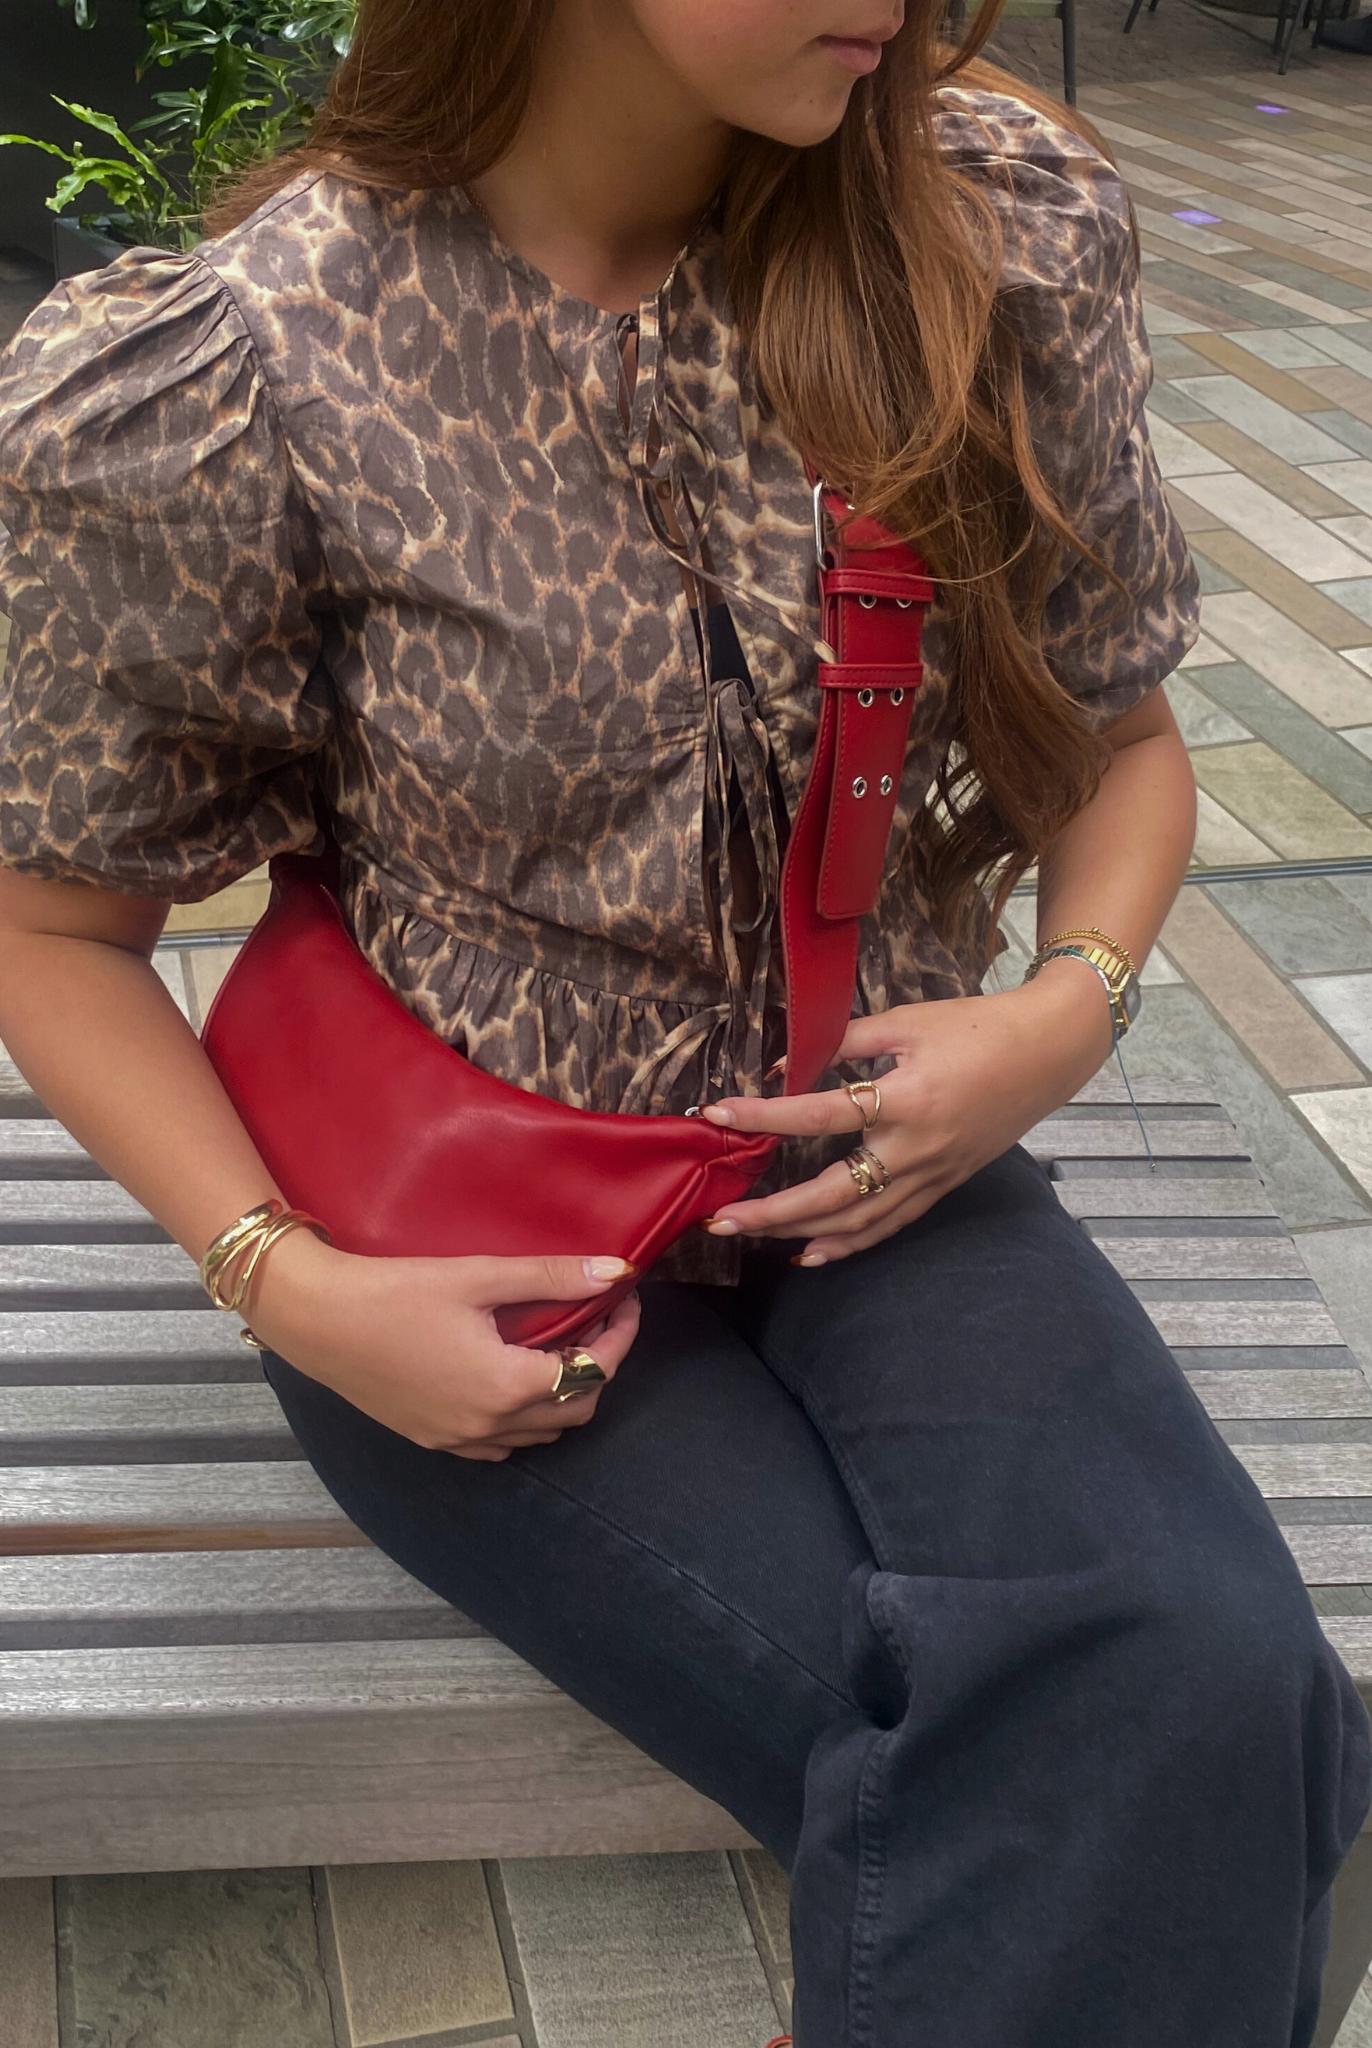 Chunky Faux Leather Buckle Sling Bag in Red | Red bag |  Women's bag | Crossbody bag |sling bag| My Accessories London bag 